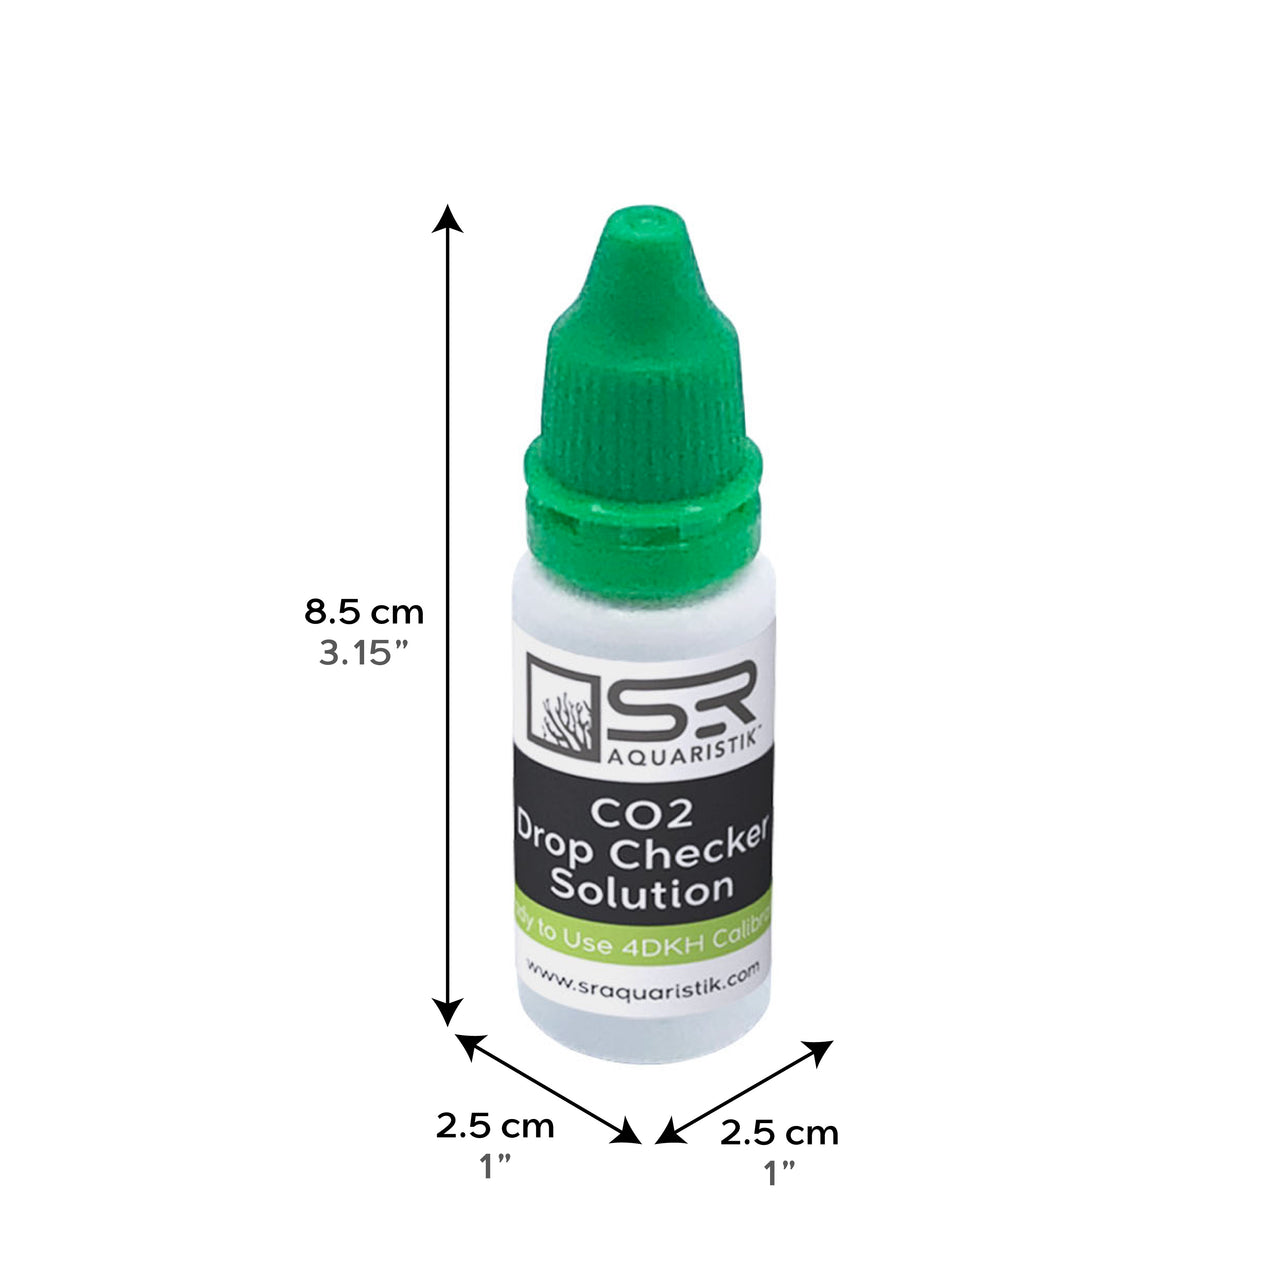 CO2 Drop Checker with 4 DKH Solution